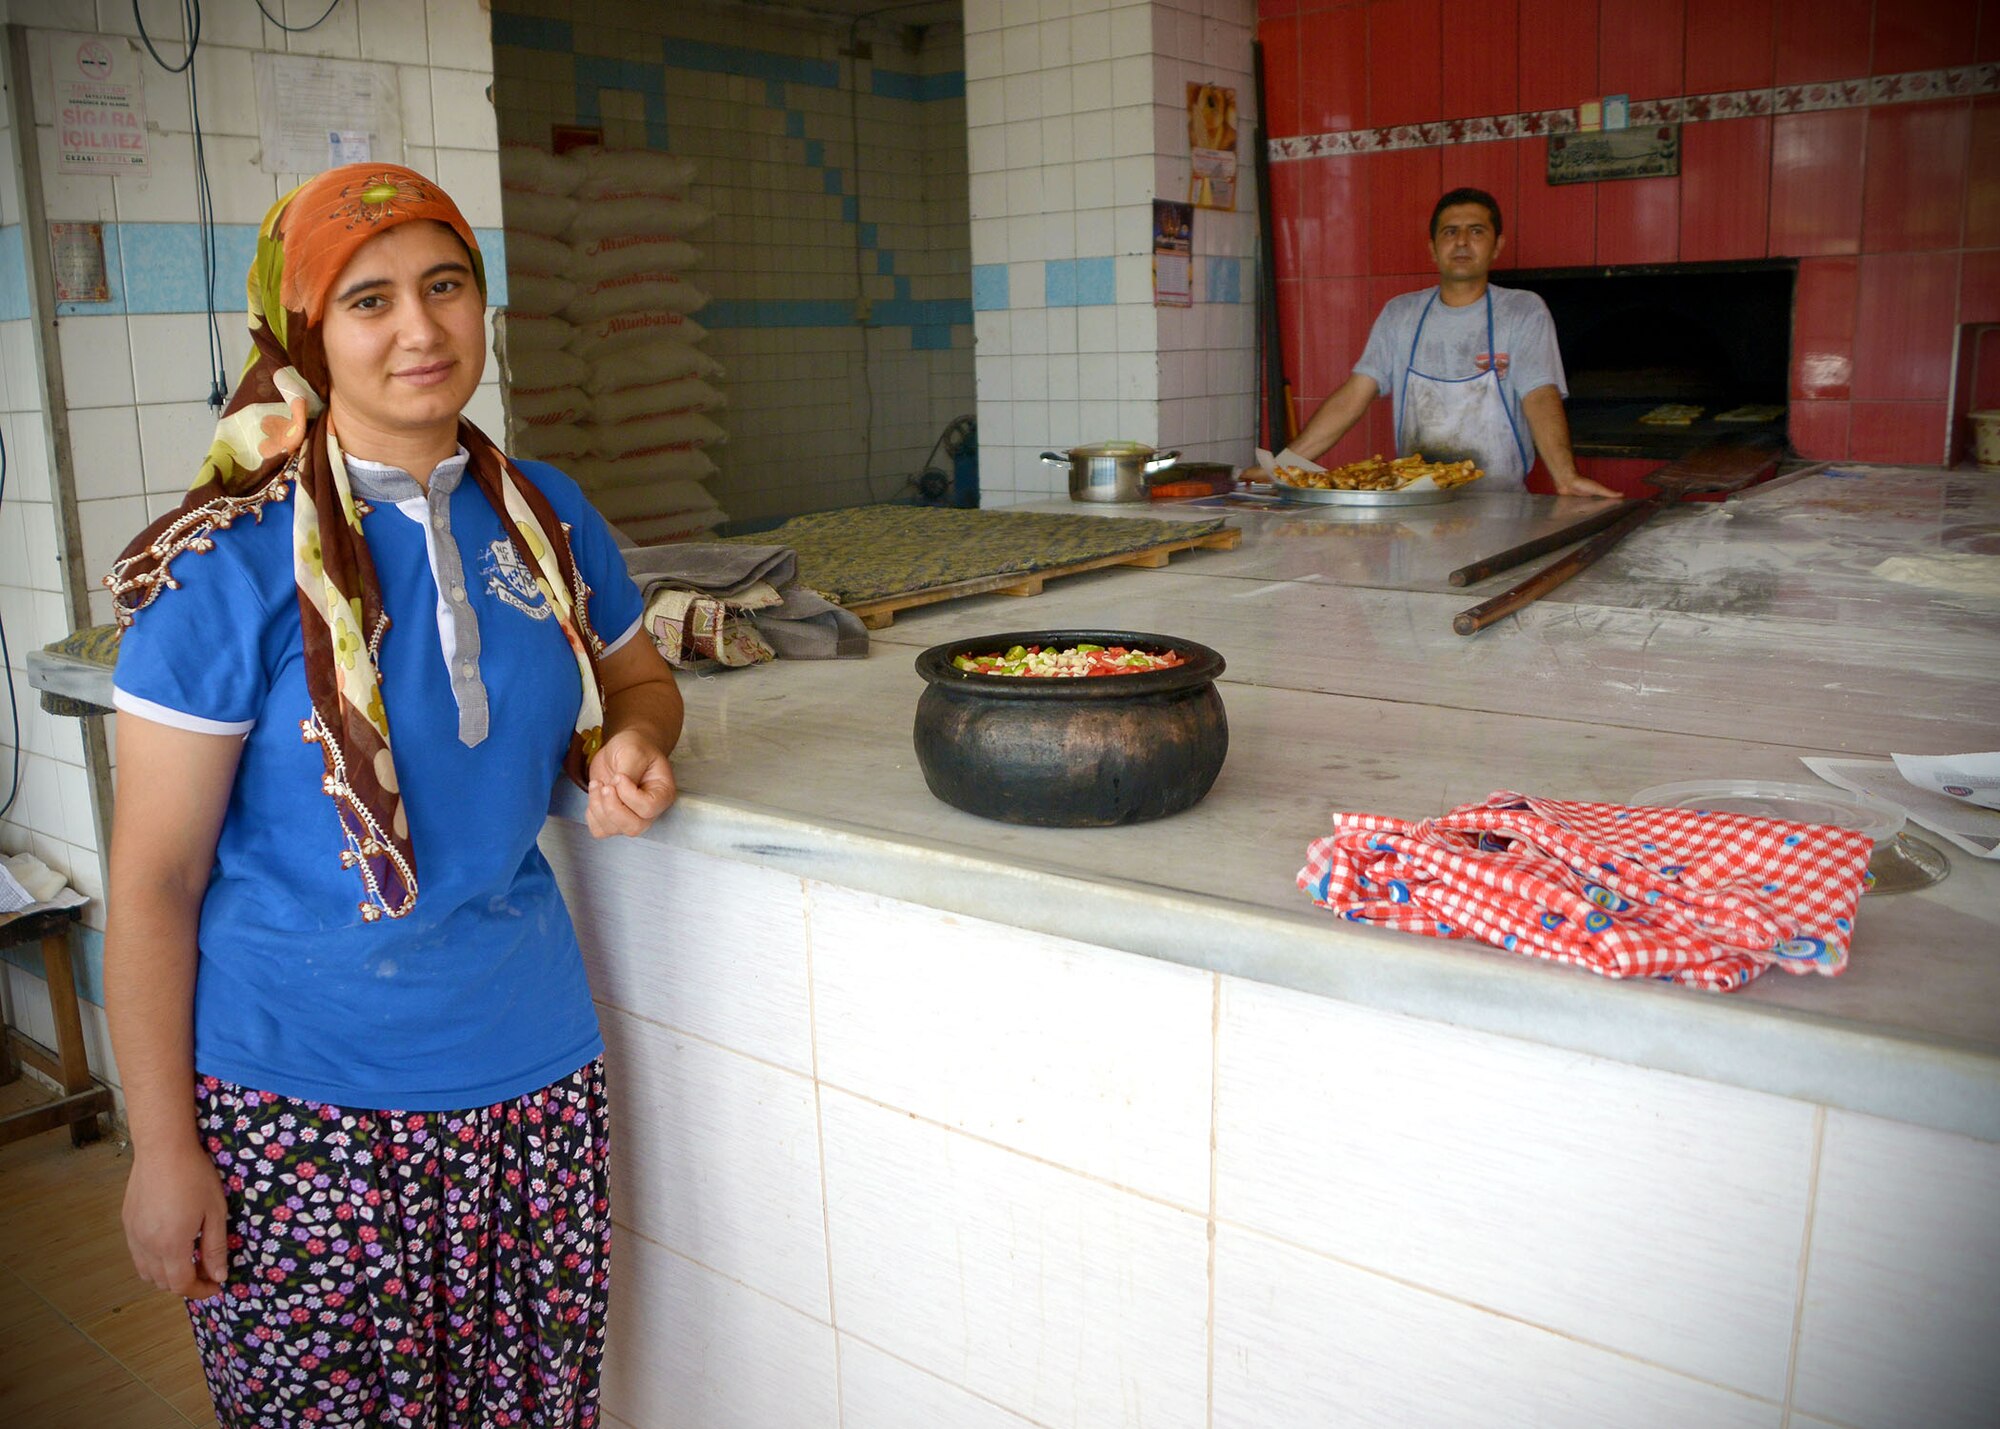 A woman poses in front of a stone pot at a local bakery July 9, 2014, near Incirlik Air Base, Turkey. Many Muslims in Turkey participate in fasting for Ramazan, during this time they will not eat or drink during daylight hours. Bakeries offer specialty breads during Ramazan after the fasting period. (U.S. Air Force photo by Staff Sgt. Veronica Pierce/Released)